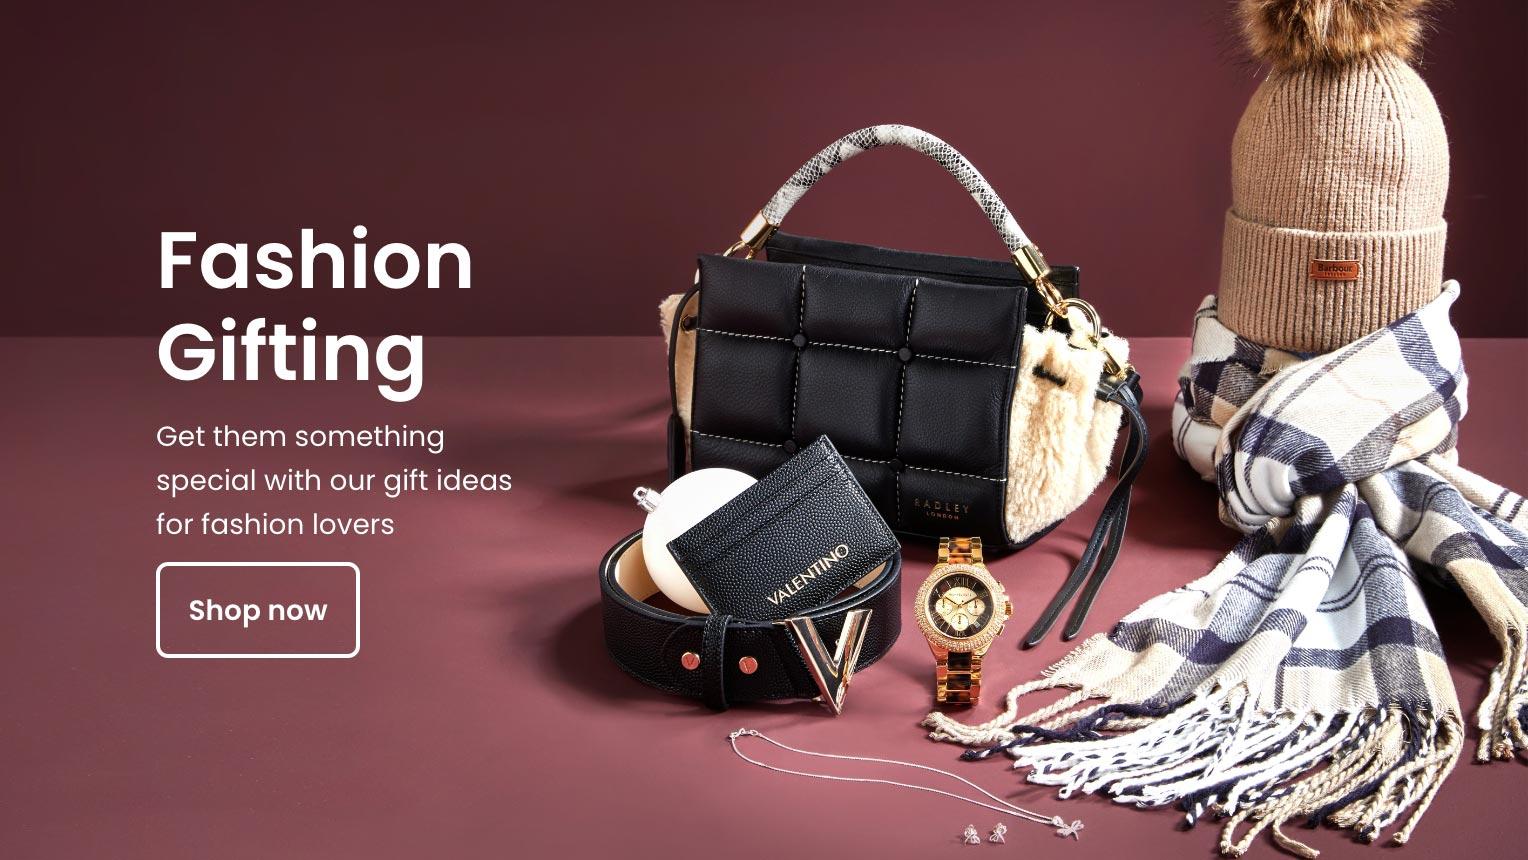 Fashion Gifting. Get them something special with our gift ideas for fashion lovers